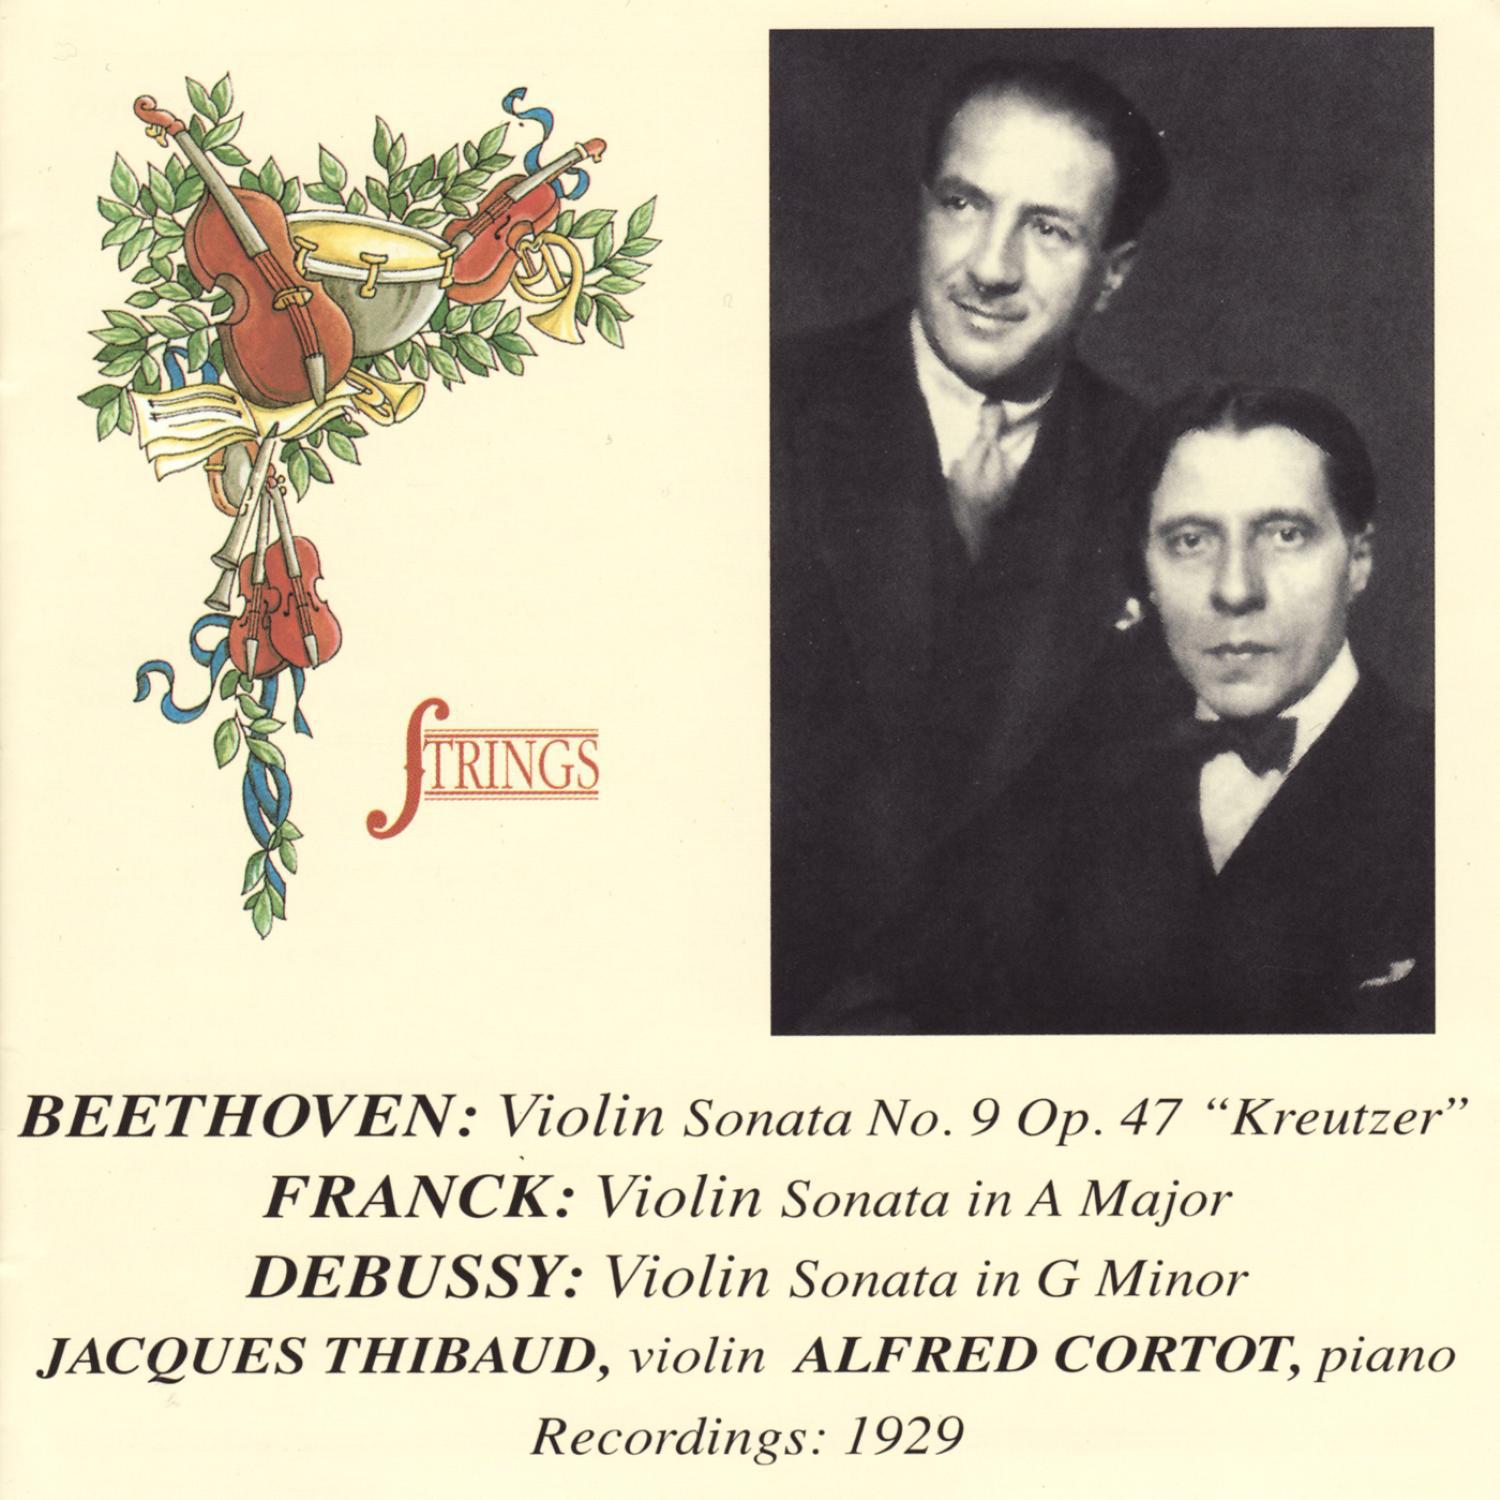 Beethoven, Franck, & Debussy: Works for Violin and Piano